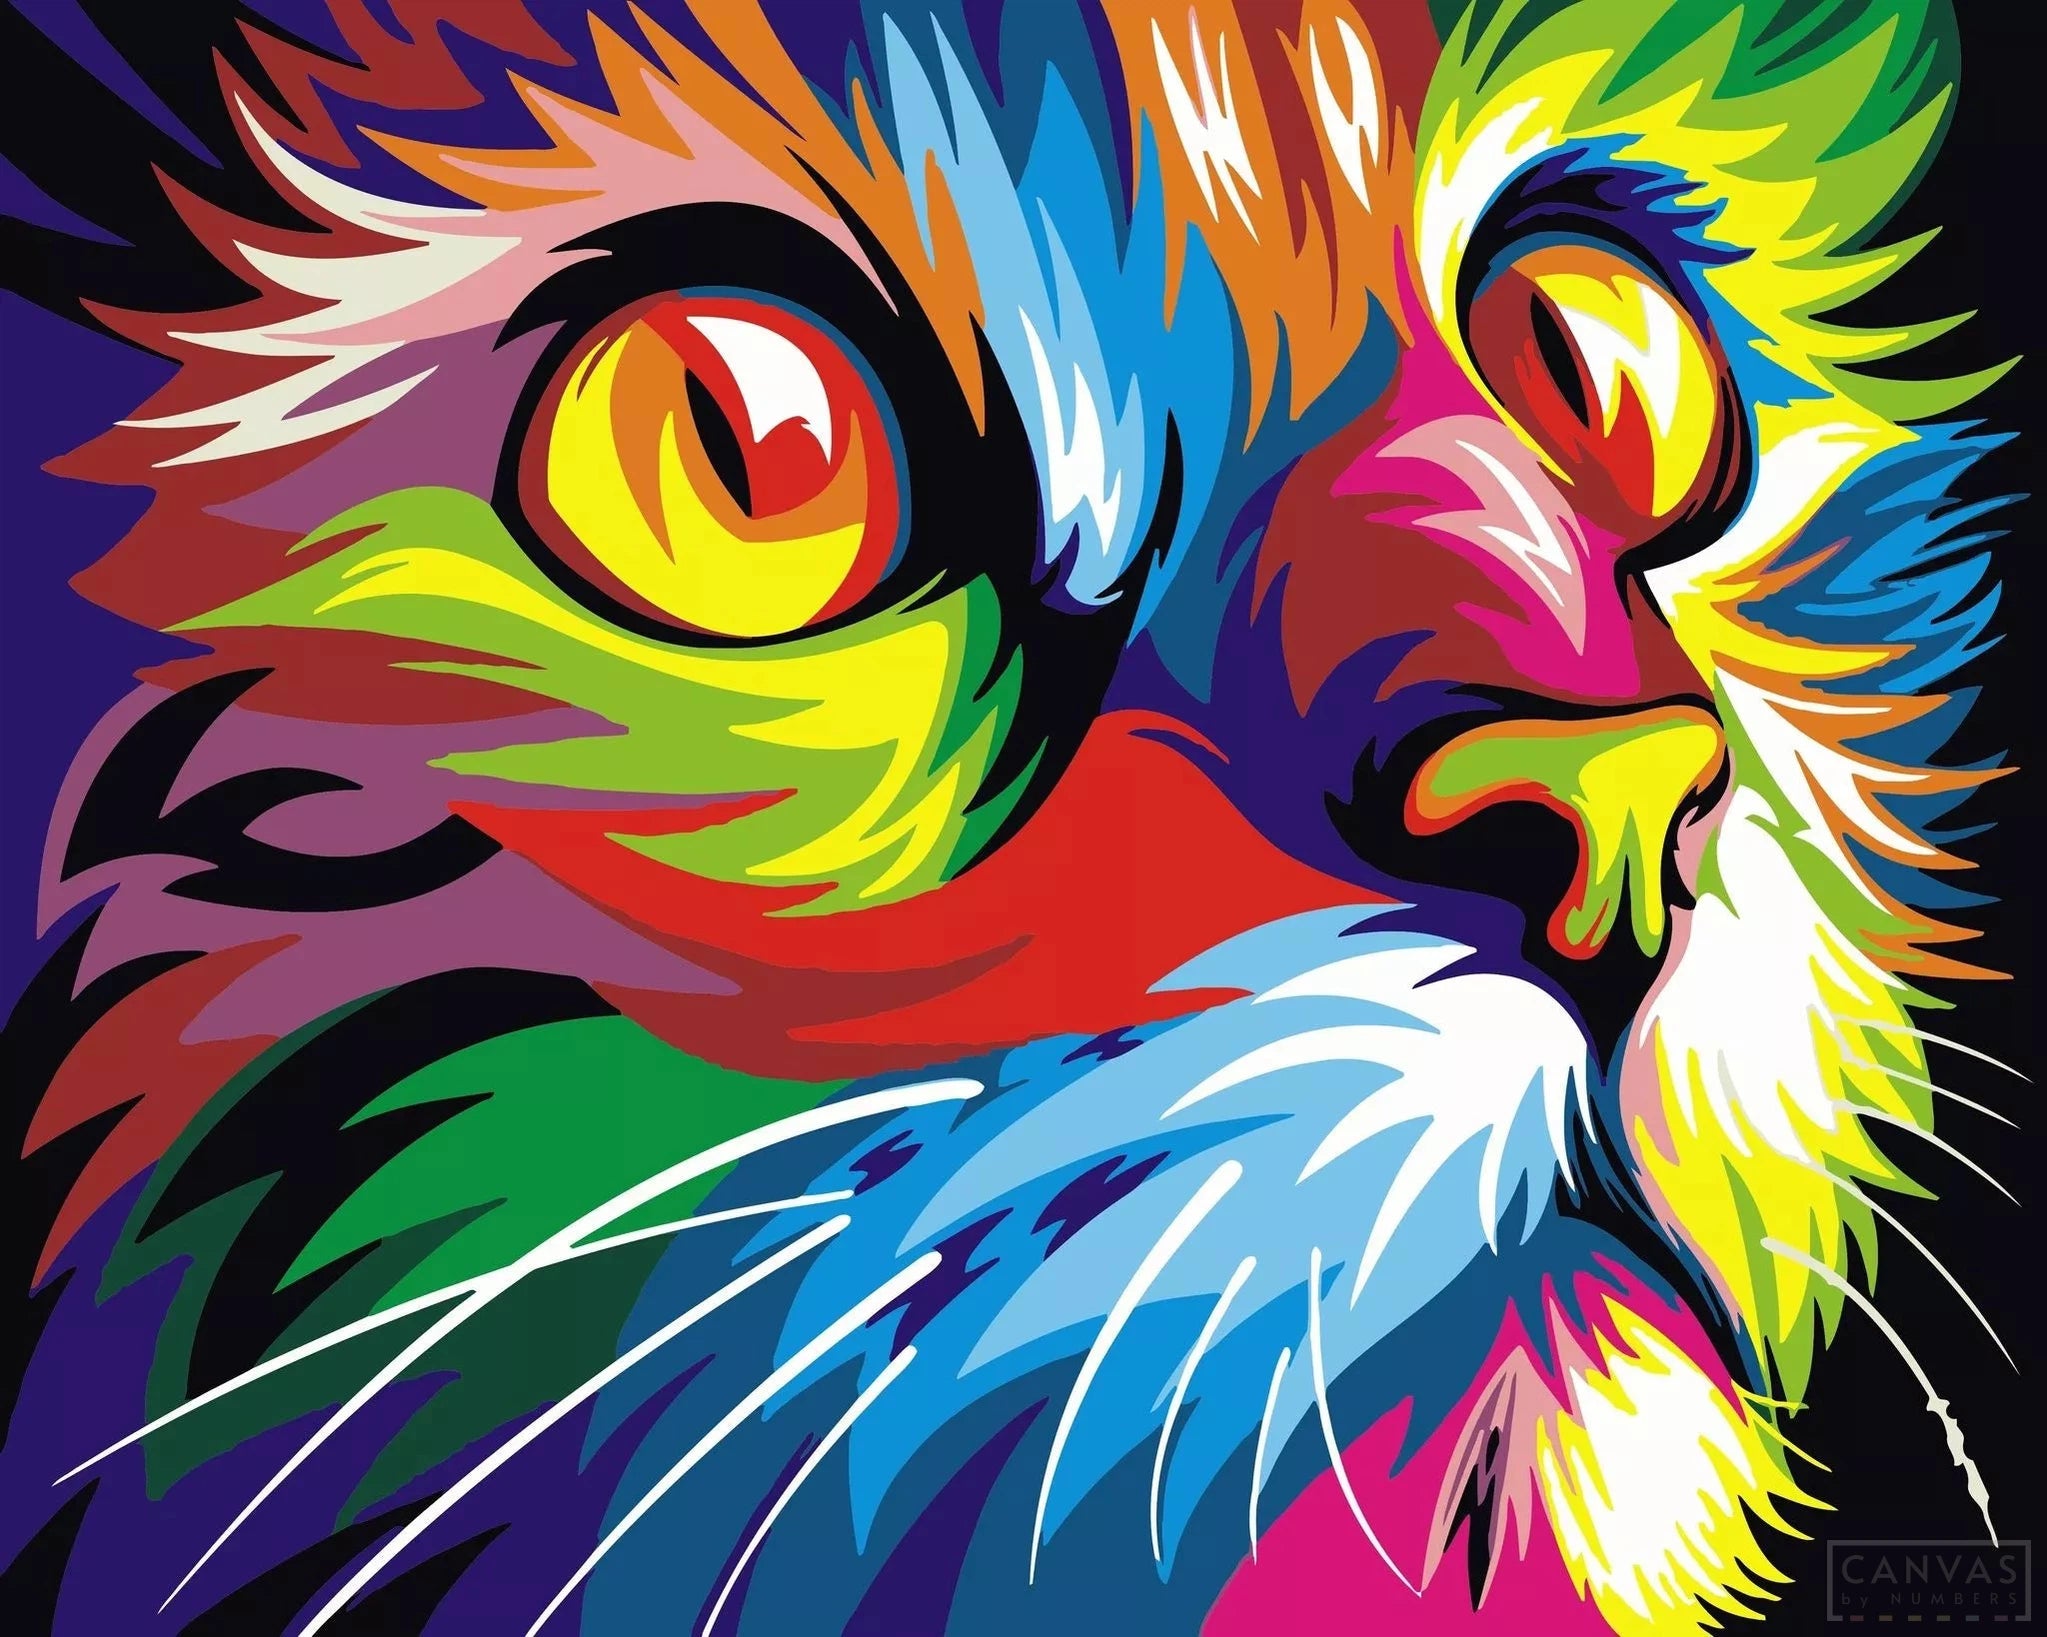 Colorful Cat Diamond Painting Kit - Ideal for Beginners